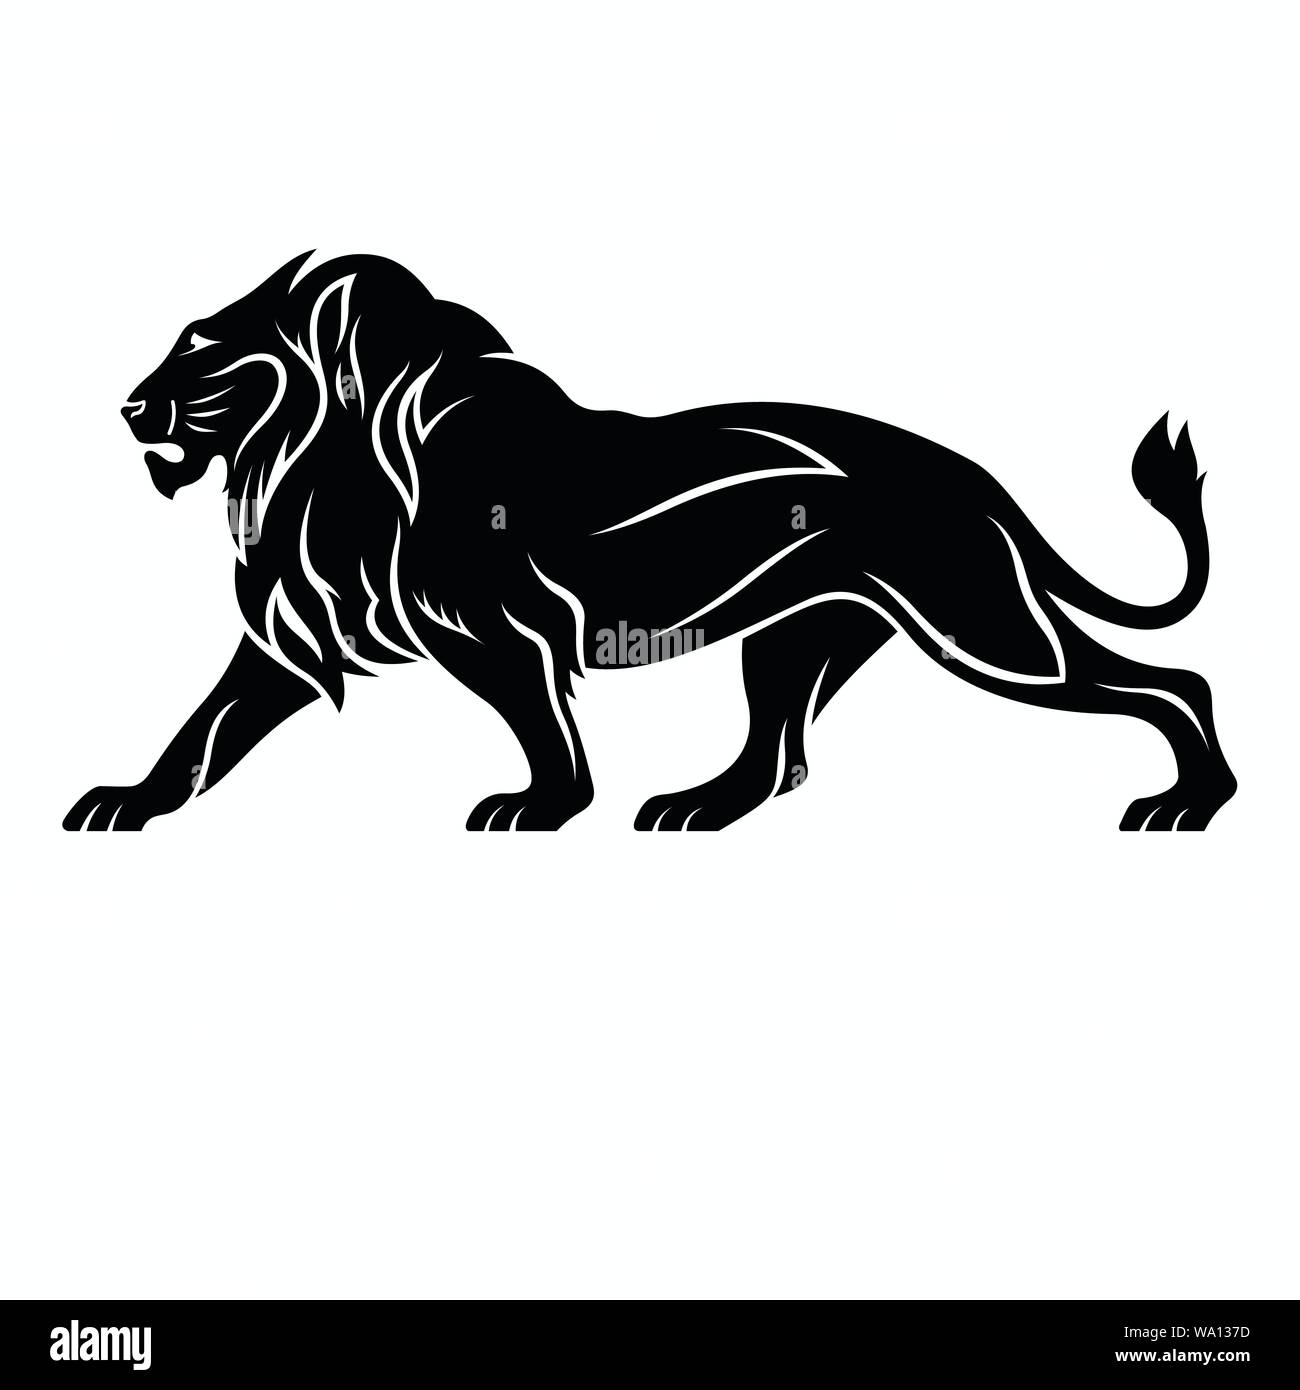 Vector illustration of a lion Stock Vector